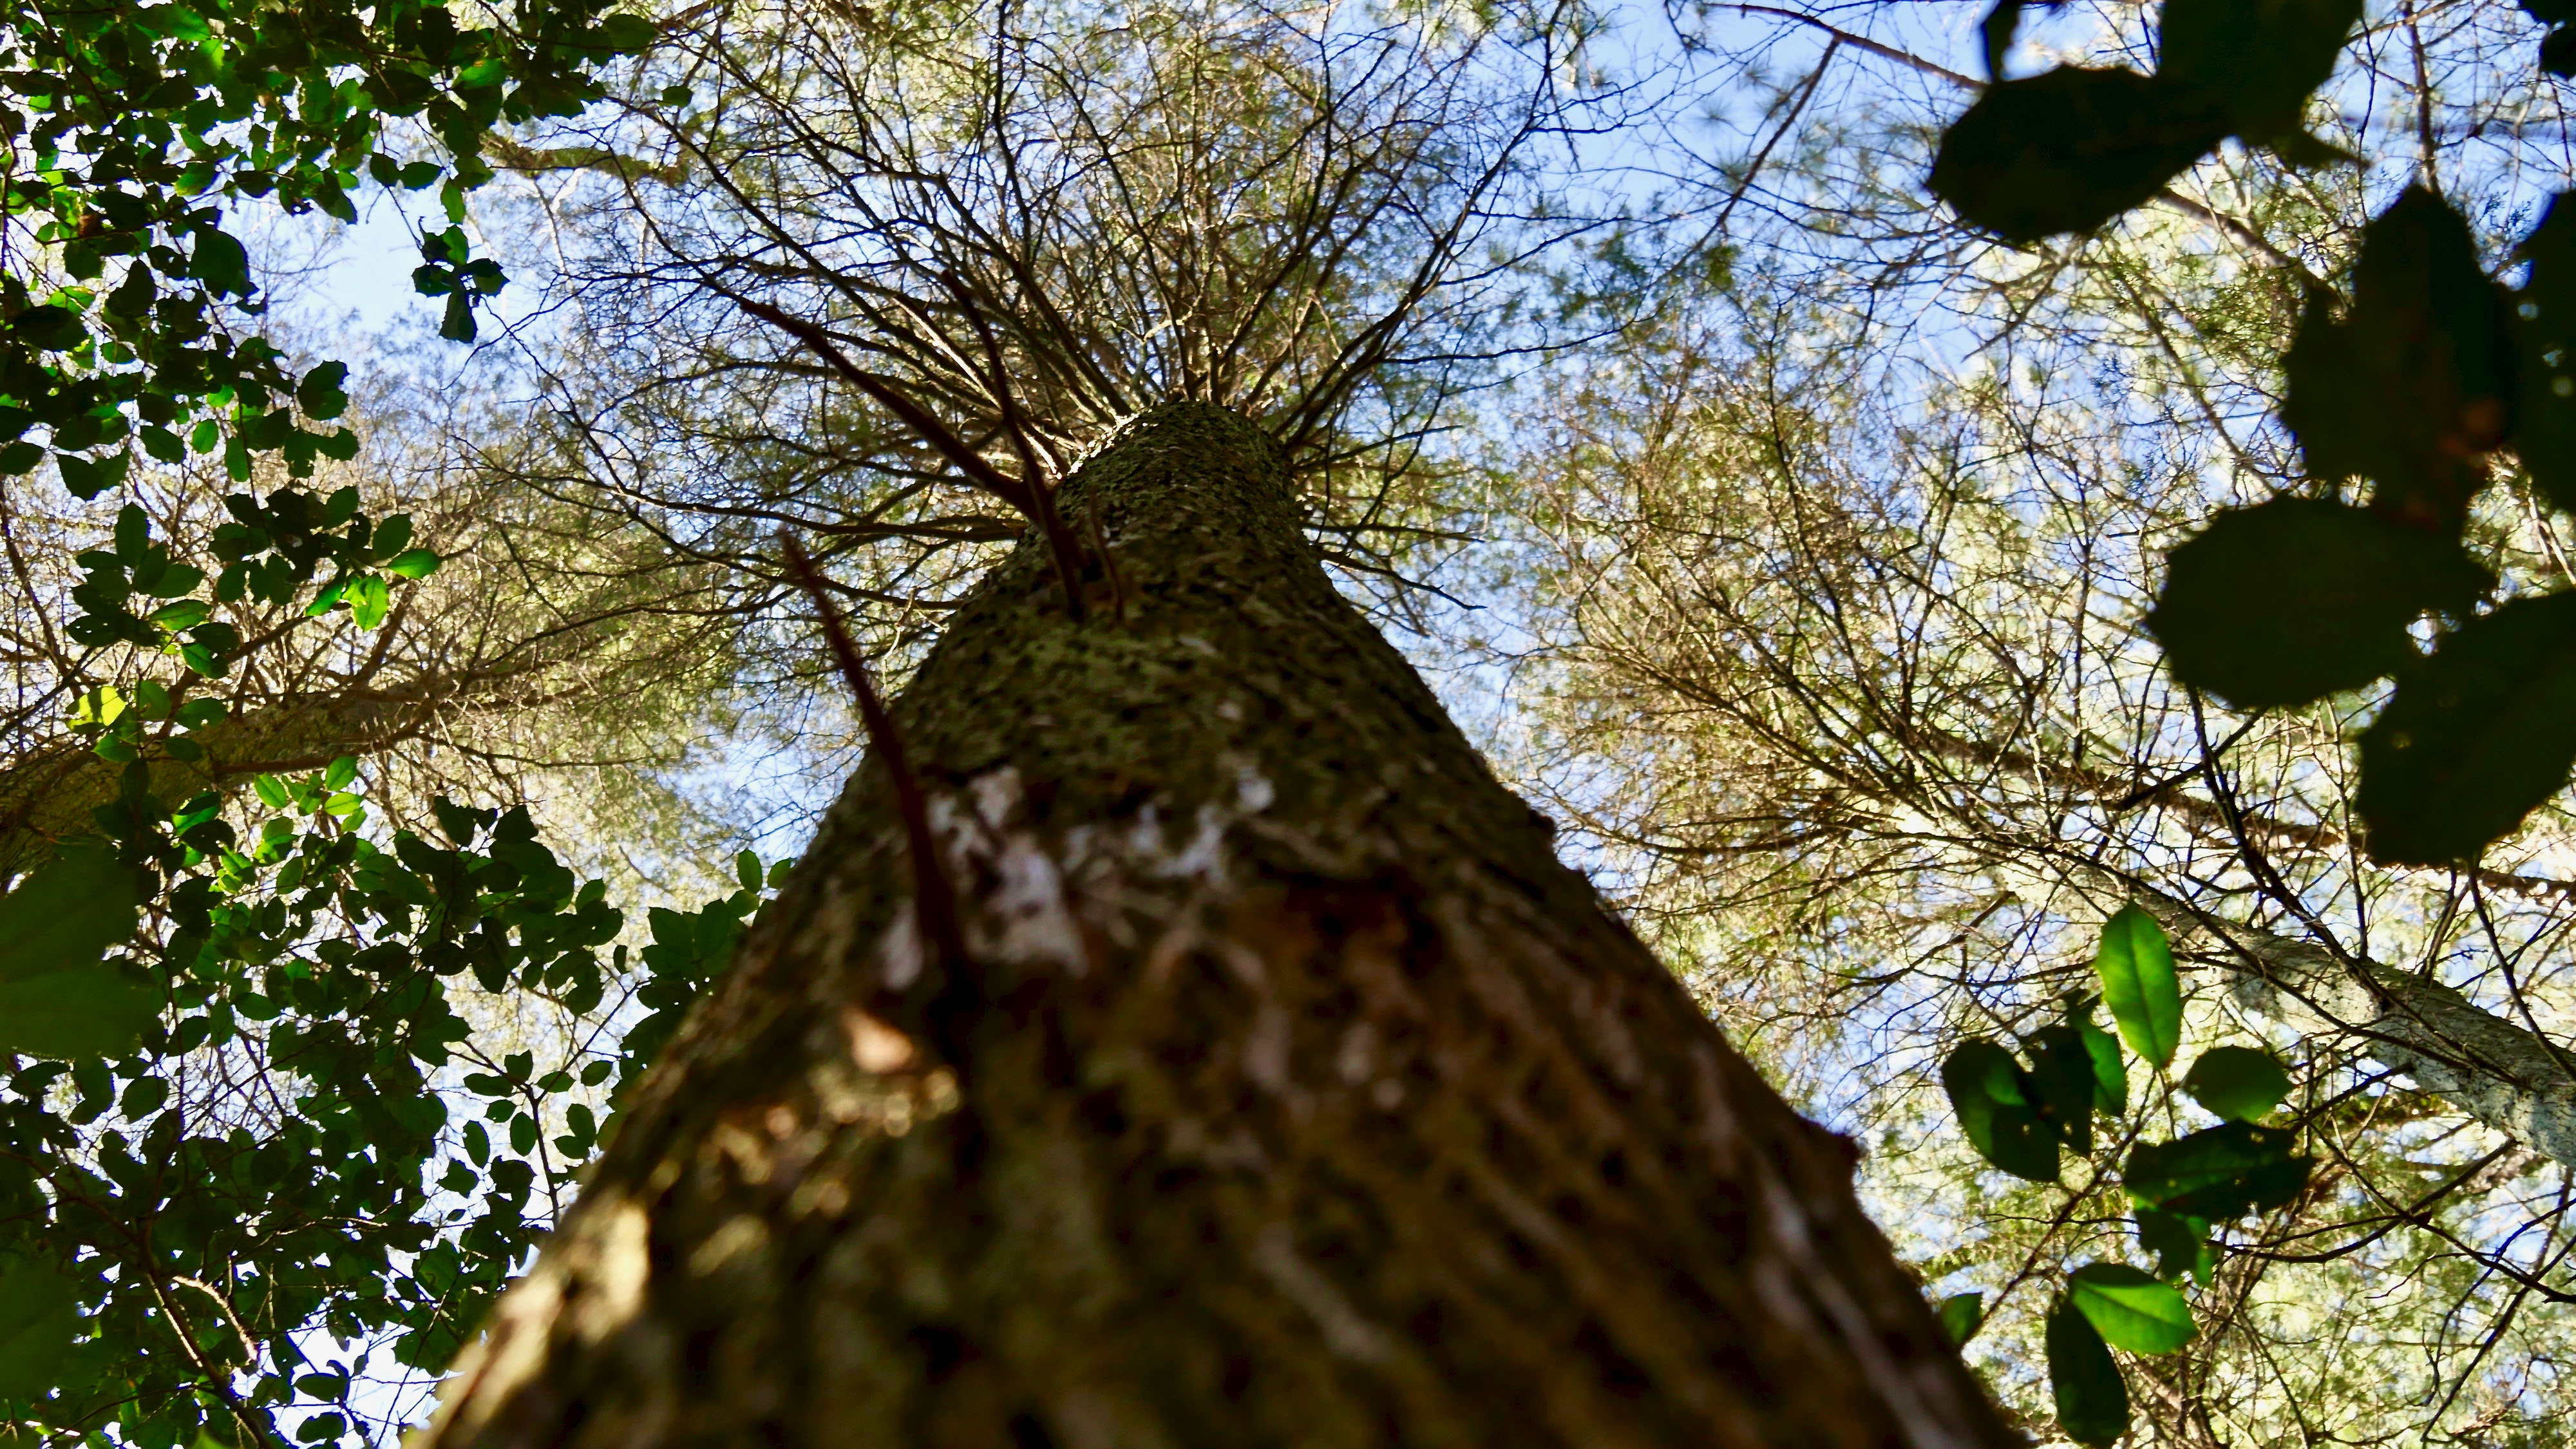 View looking up along the trunk of a white cedar tree.